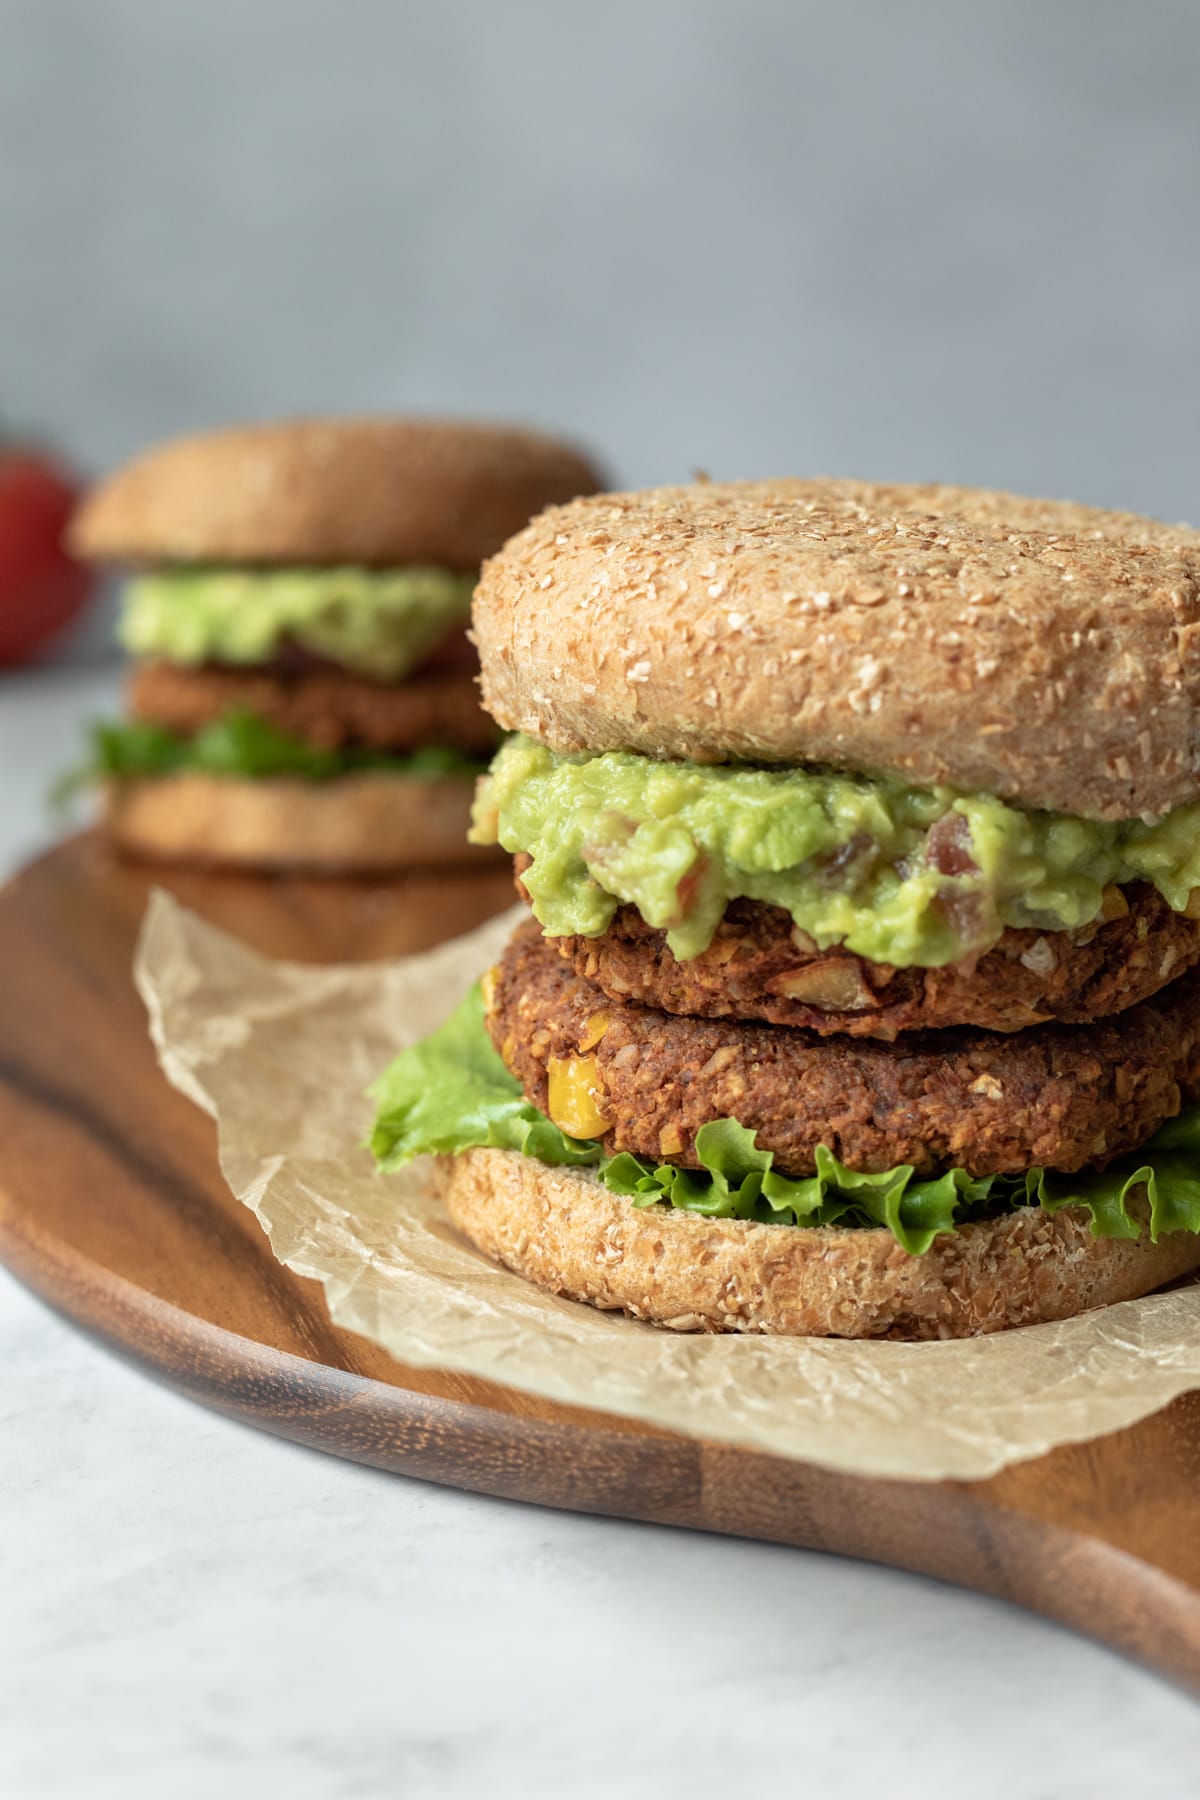 two vegan burgers loaded with fixings sitting on a wood serving board.